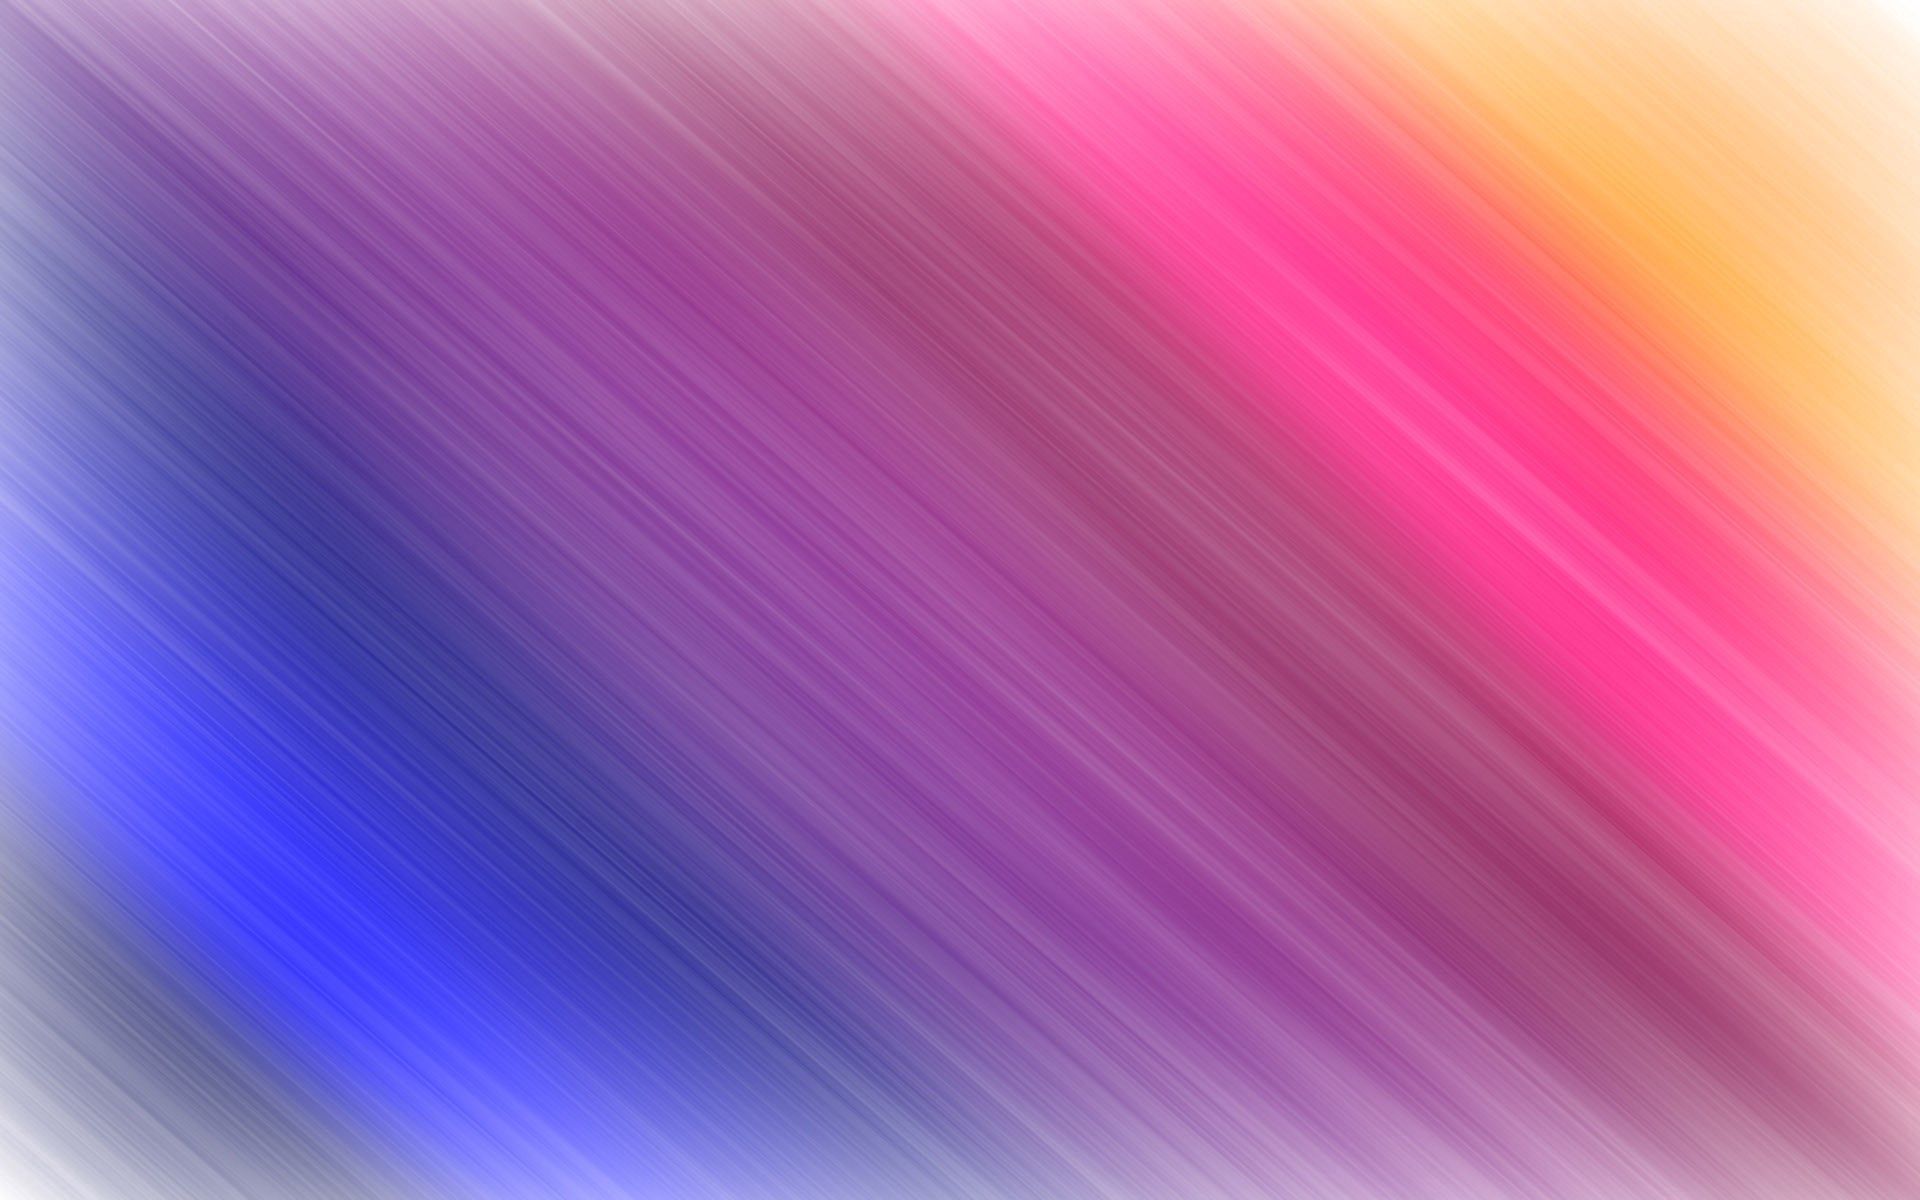 1920x1080 Background lines, obliquely, abstract, bright, multicolored, motley